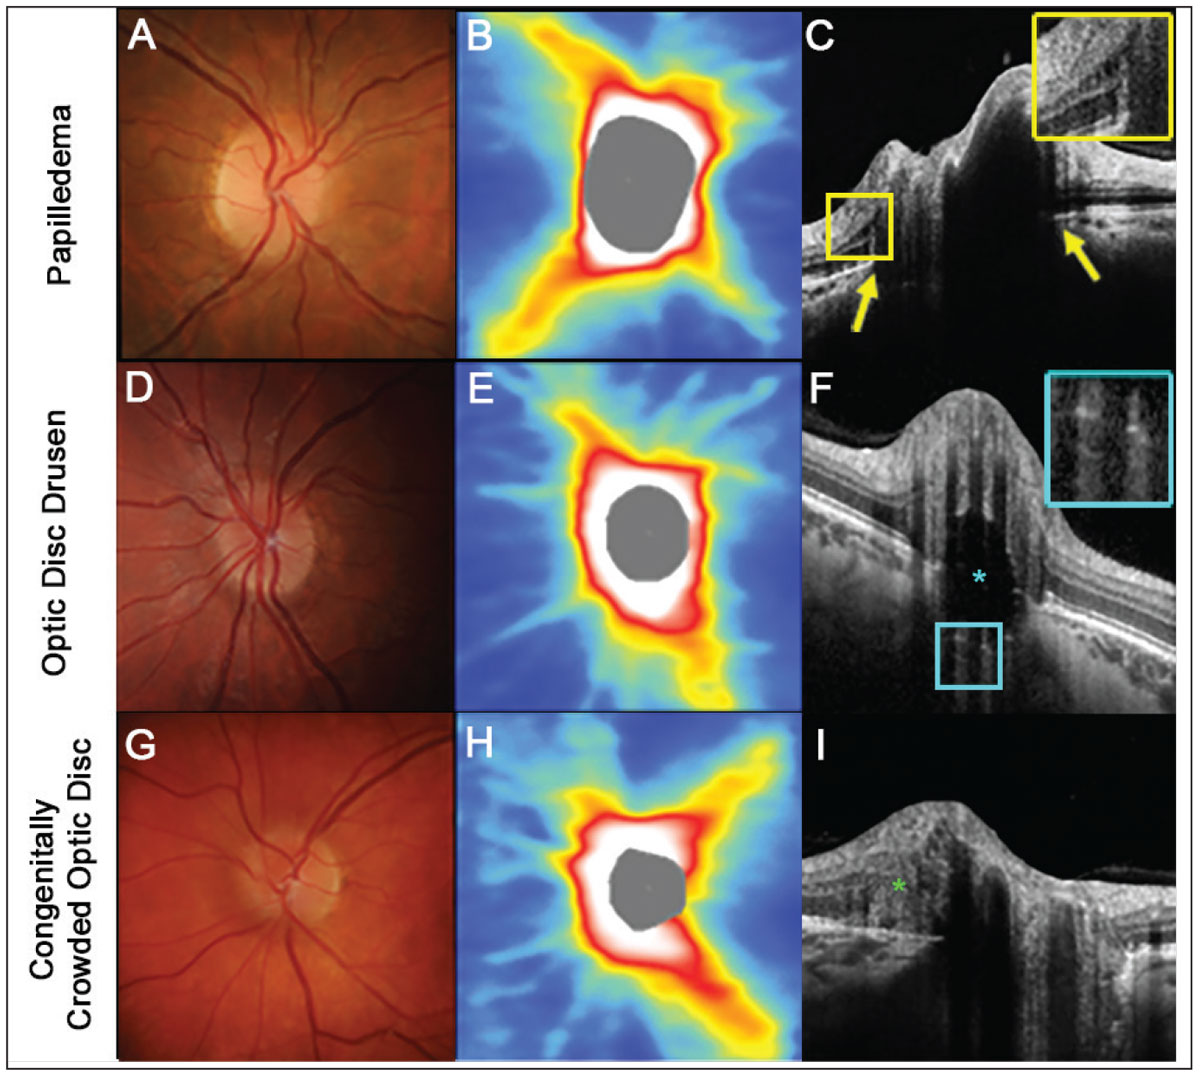 Fig. 4. An example of papilledema. (A) The right disc has minimal visible cup with some subtle blurring of the superonasal disc margin. (B) OCT thickness heat map shows thick superior and inferior RNFL. (C) A high-density OCT line scan shows anterior protrusion of Bruch’s membrane at its opening (yellow arrows) and intraretinal cystic spaces temporal to the disc margin (inset). (D-F) An example of optic disc seen more posteriorly within the optic nerve space (inset). (G-I). An example of a congenitally crowded optic disc. While the fundus photograph and OCT thickness heat map are similar to the other two conditions, there are no other features specific to these conditions visible on a high-density OCT line scan. Note that while a peripapillary hyper-reflective ovoid mass-like structure (PHOMS) can be noted at the nasal neuroretinal rim (green asterisk), this feature is non-specific to various causes of elevated optic discs (I).